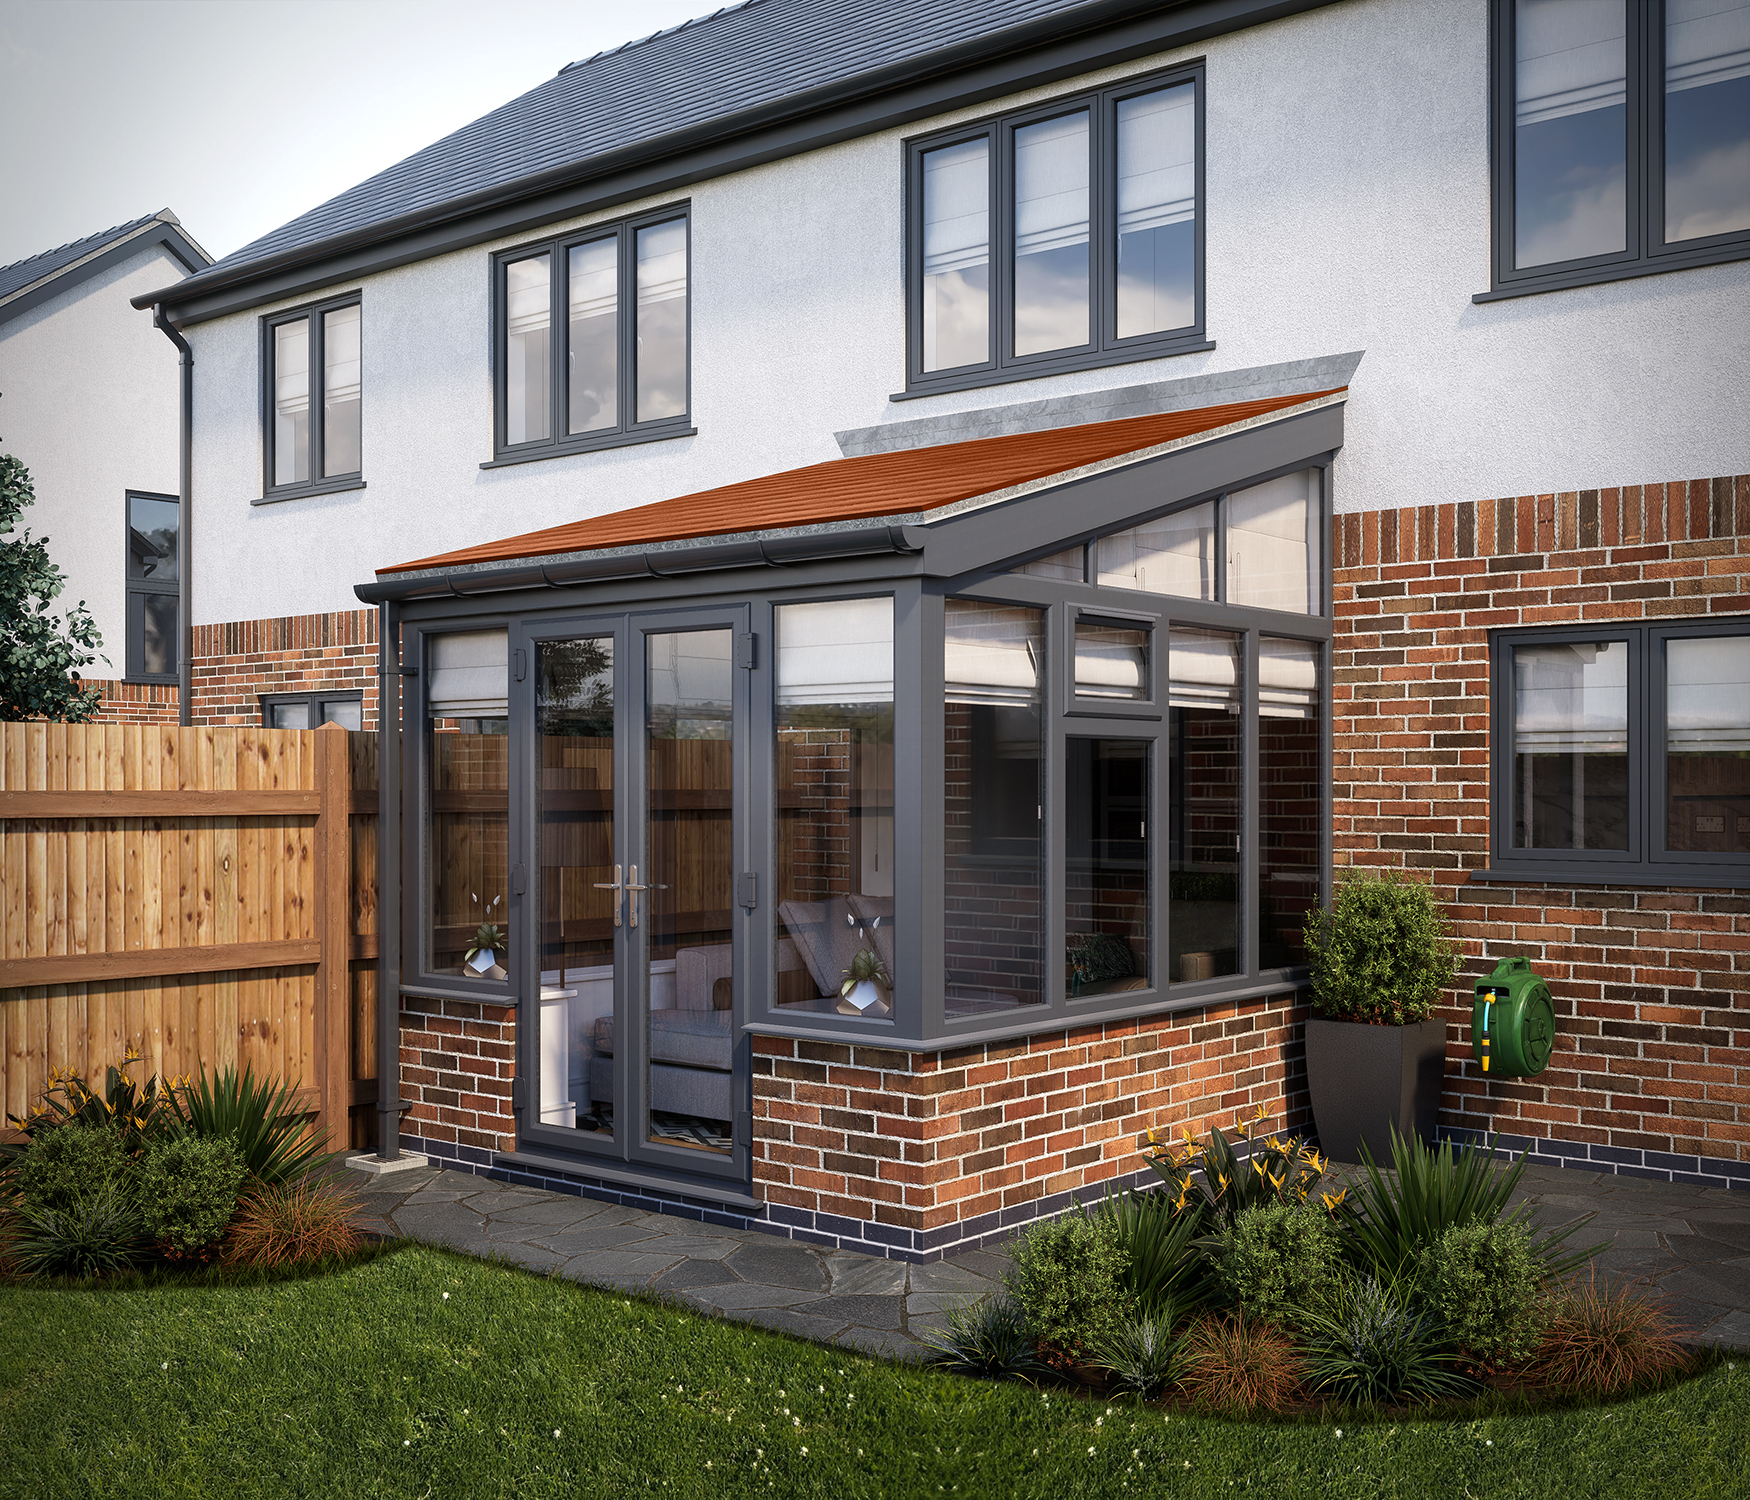 Image of SOLid Roof Lean to Conservatory Grey Frames Dwarf Wall with Rustic Terracotta Tiles - 13 x 13ft